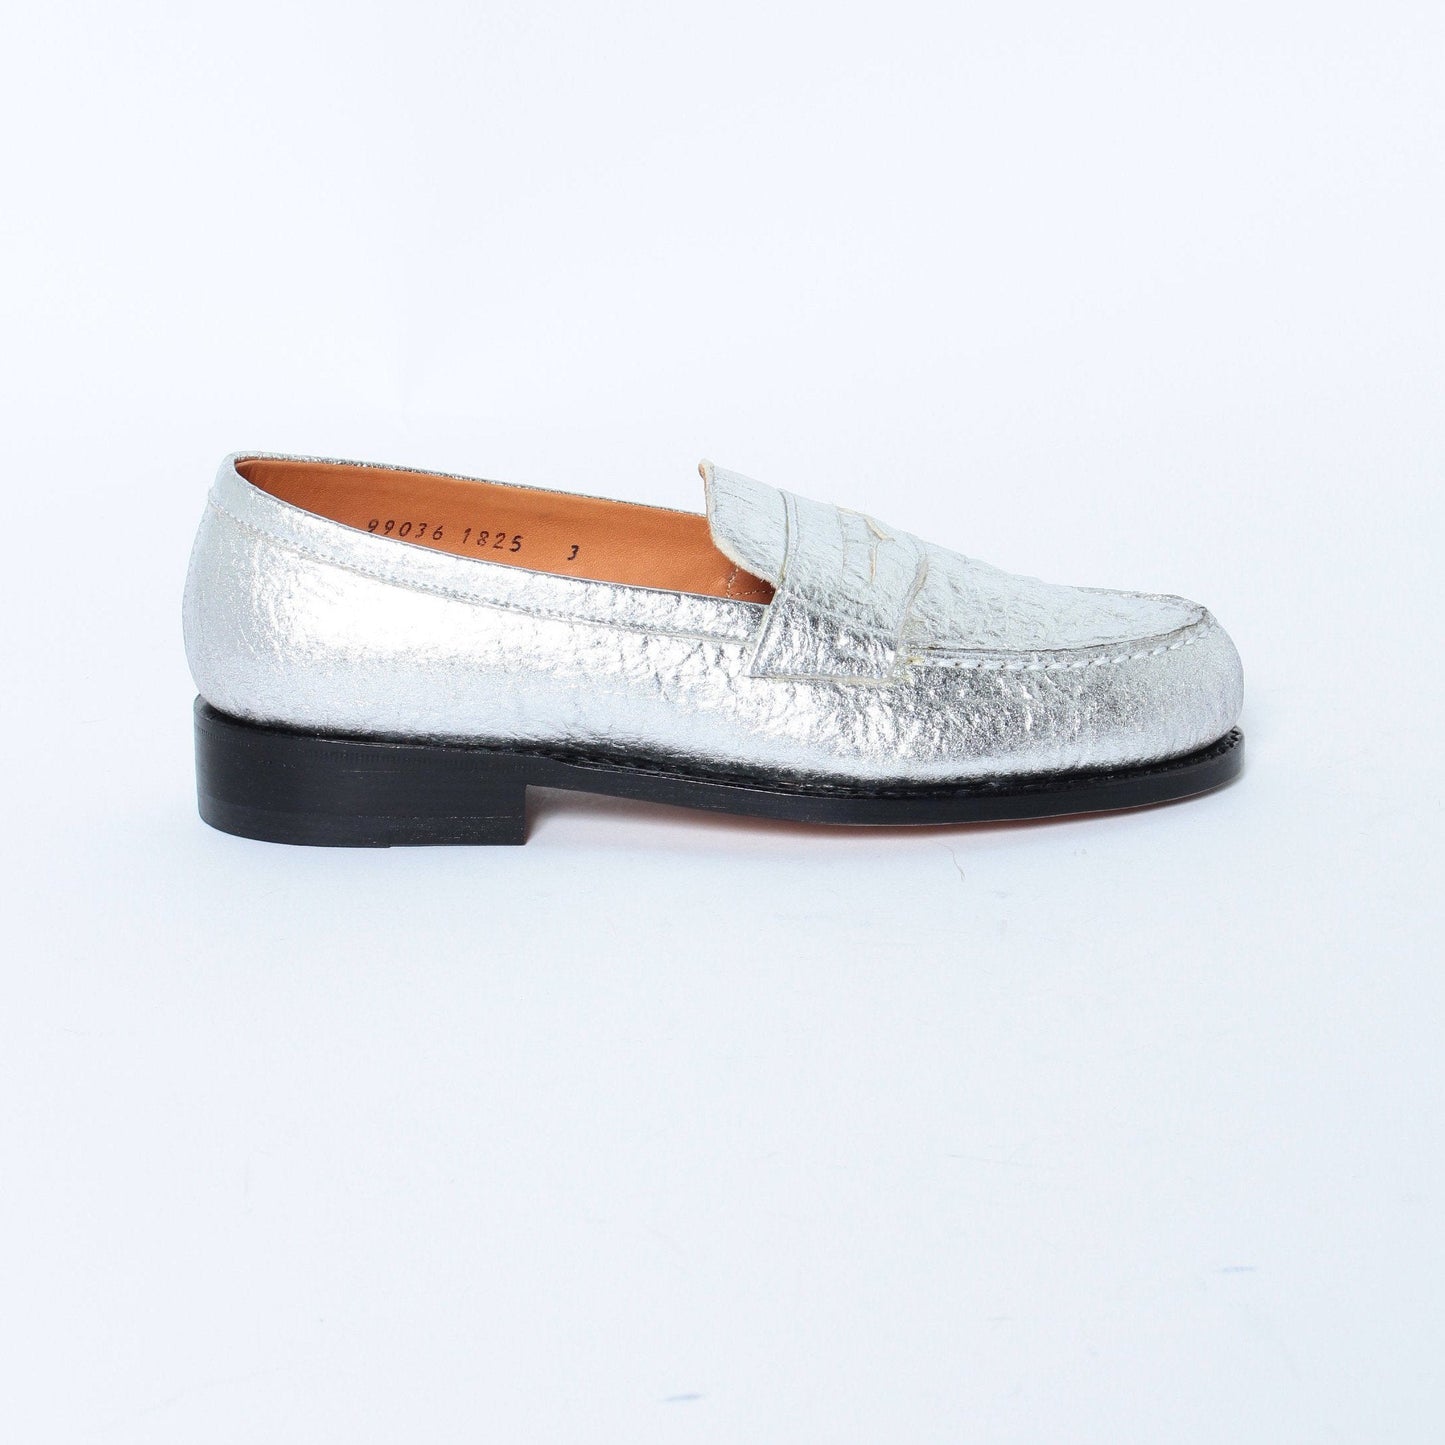 99036 / PINATEX / SILVER / LEATHER SOLE / UK3.0(22.0cm)